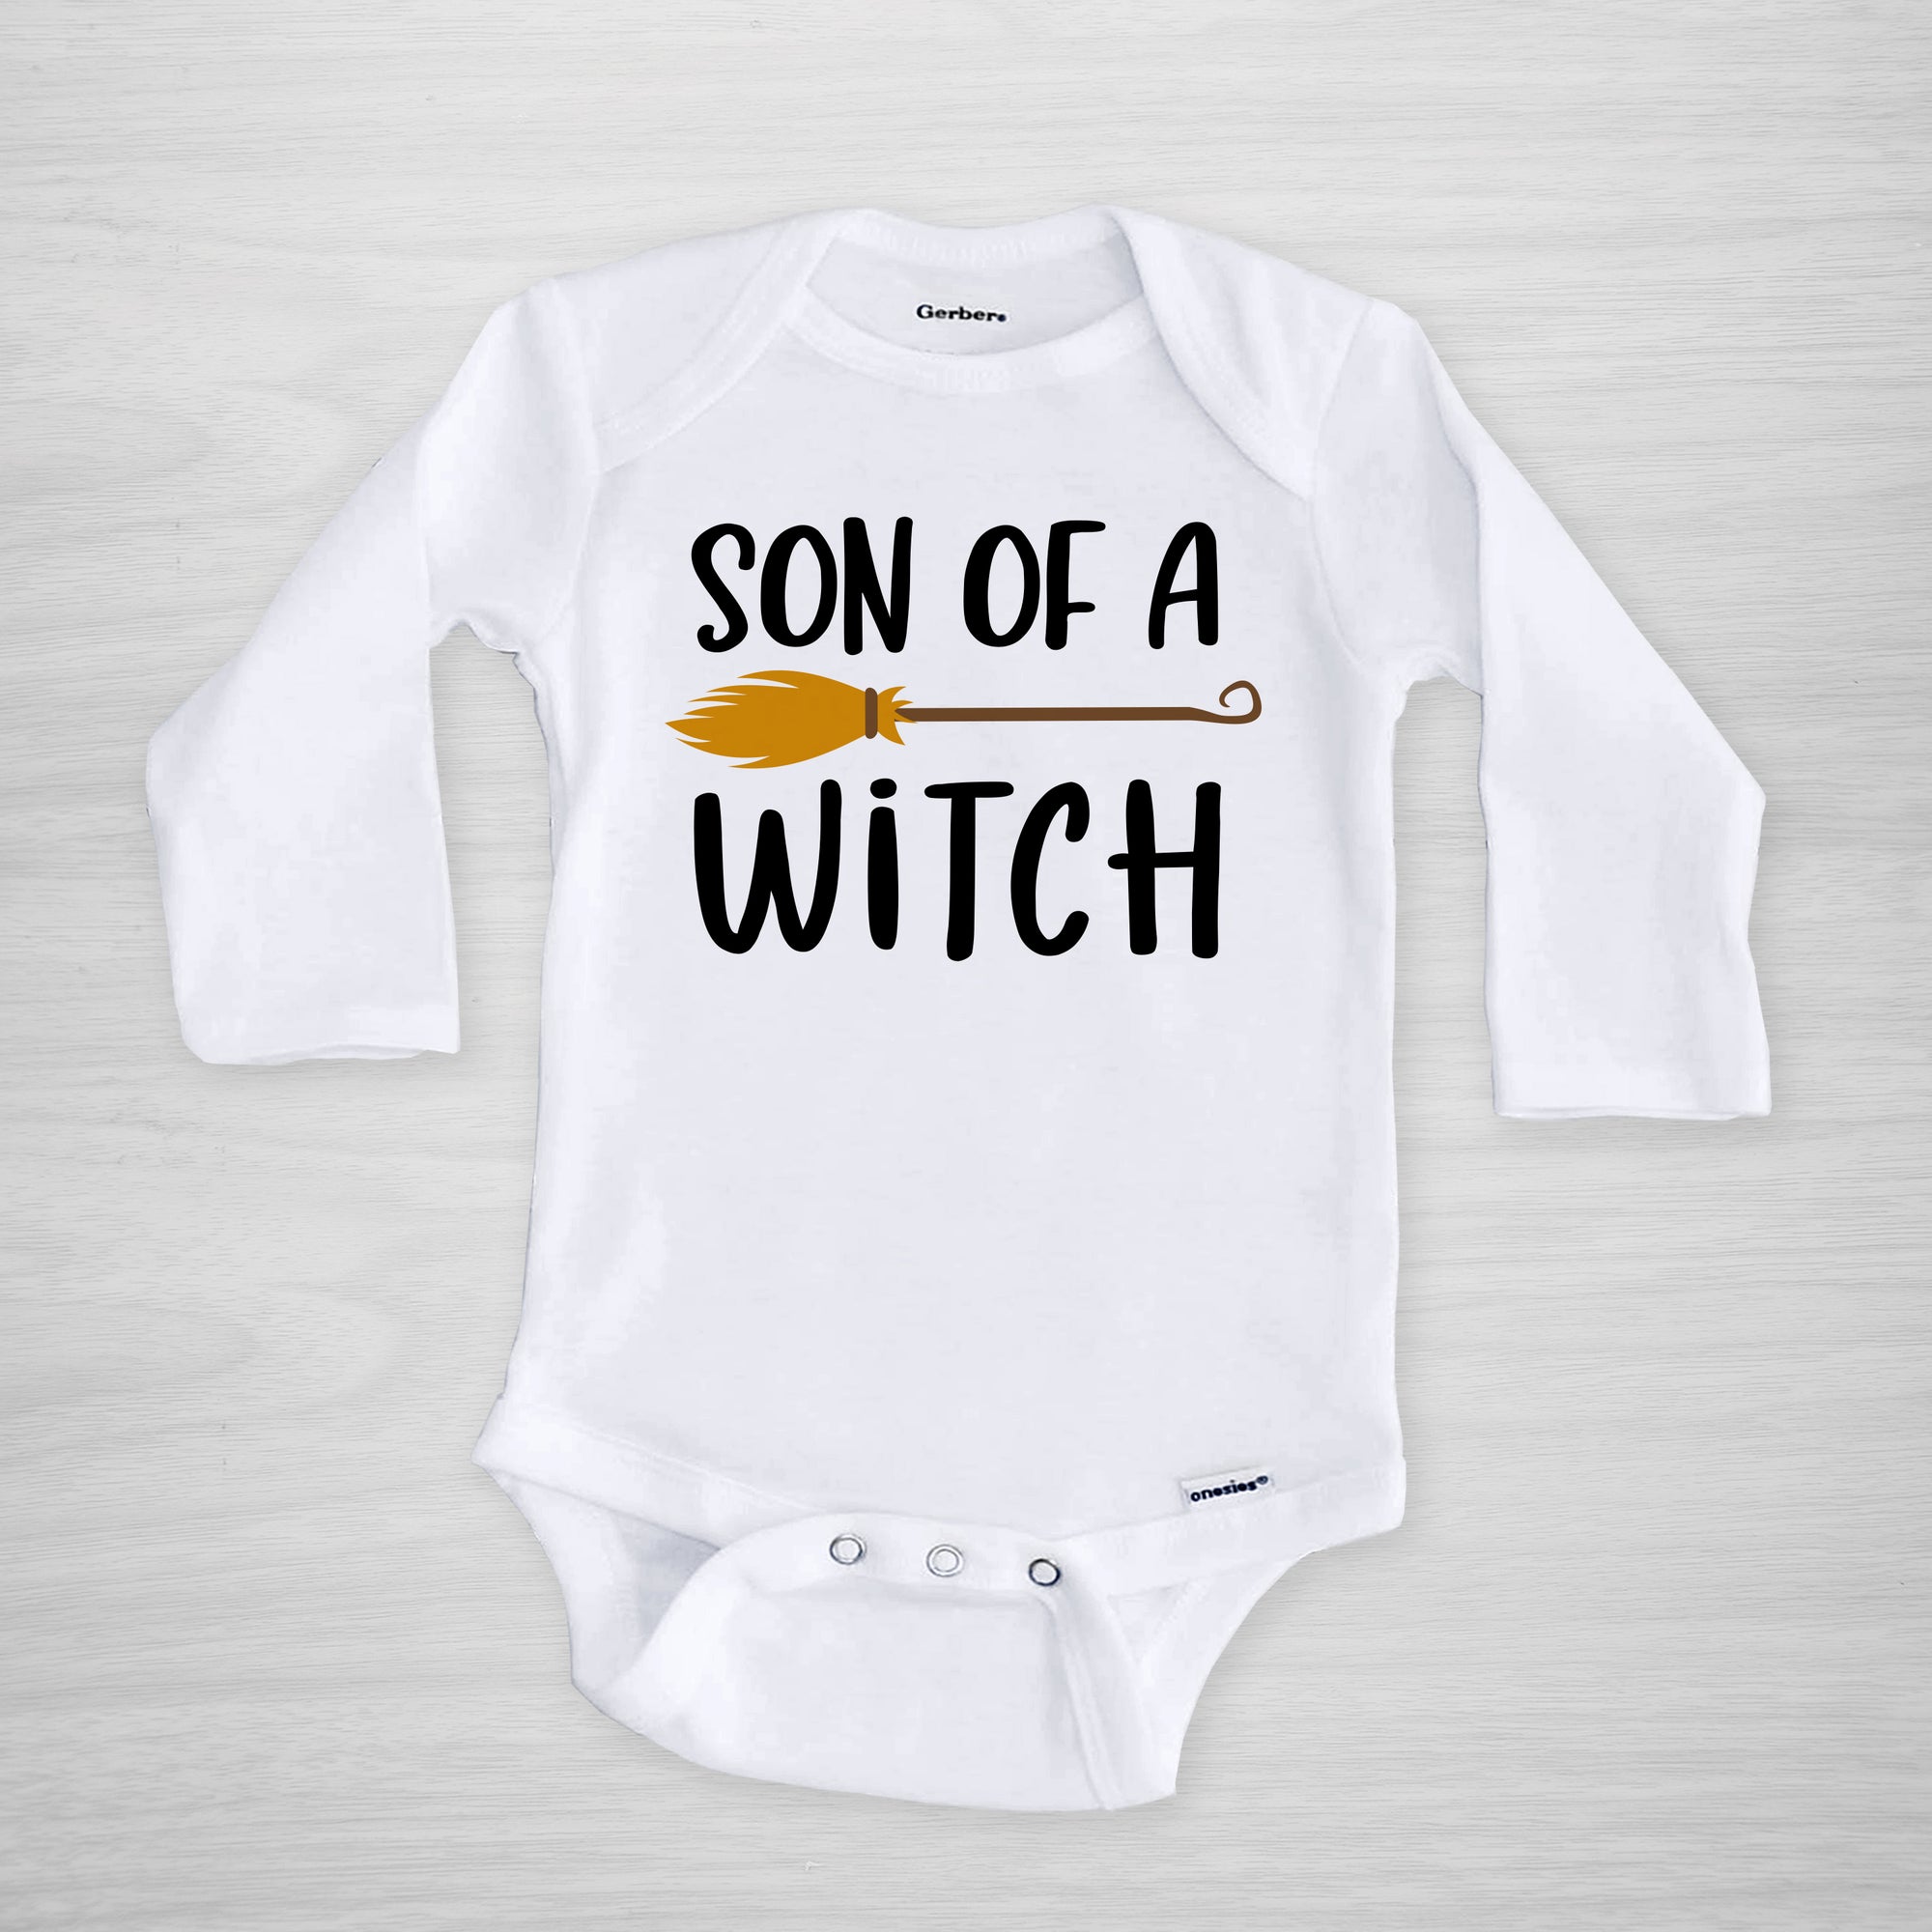 Son of a Witch Halloween Onesie, long sleeved